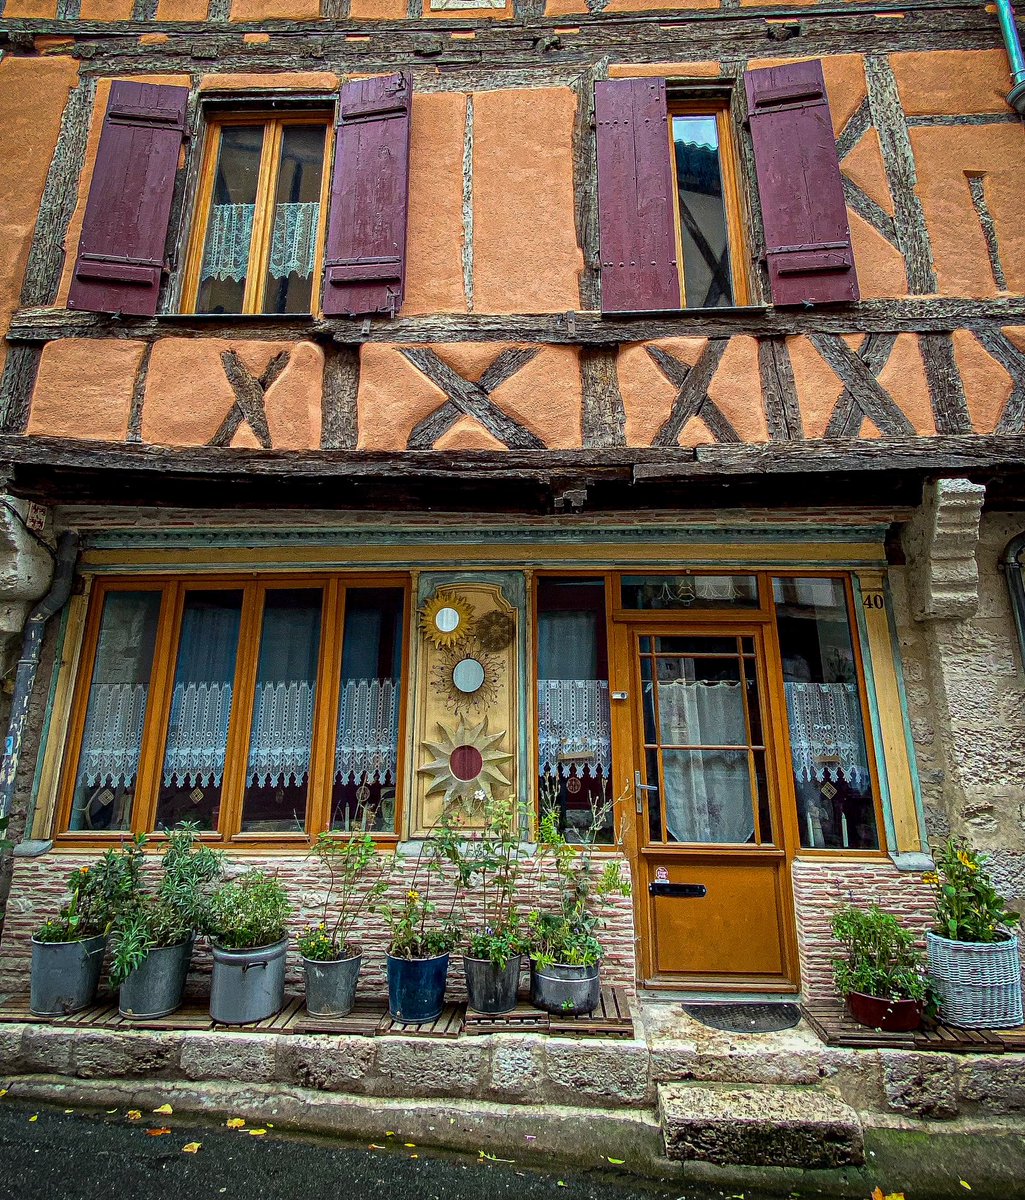 Potted plants and lace curtains: Issigeac, Périgord #DailyDoor